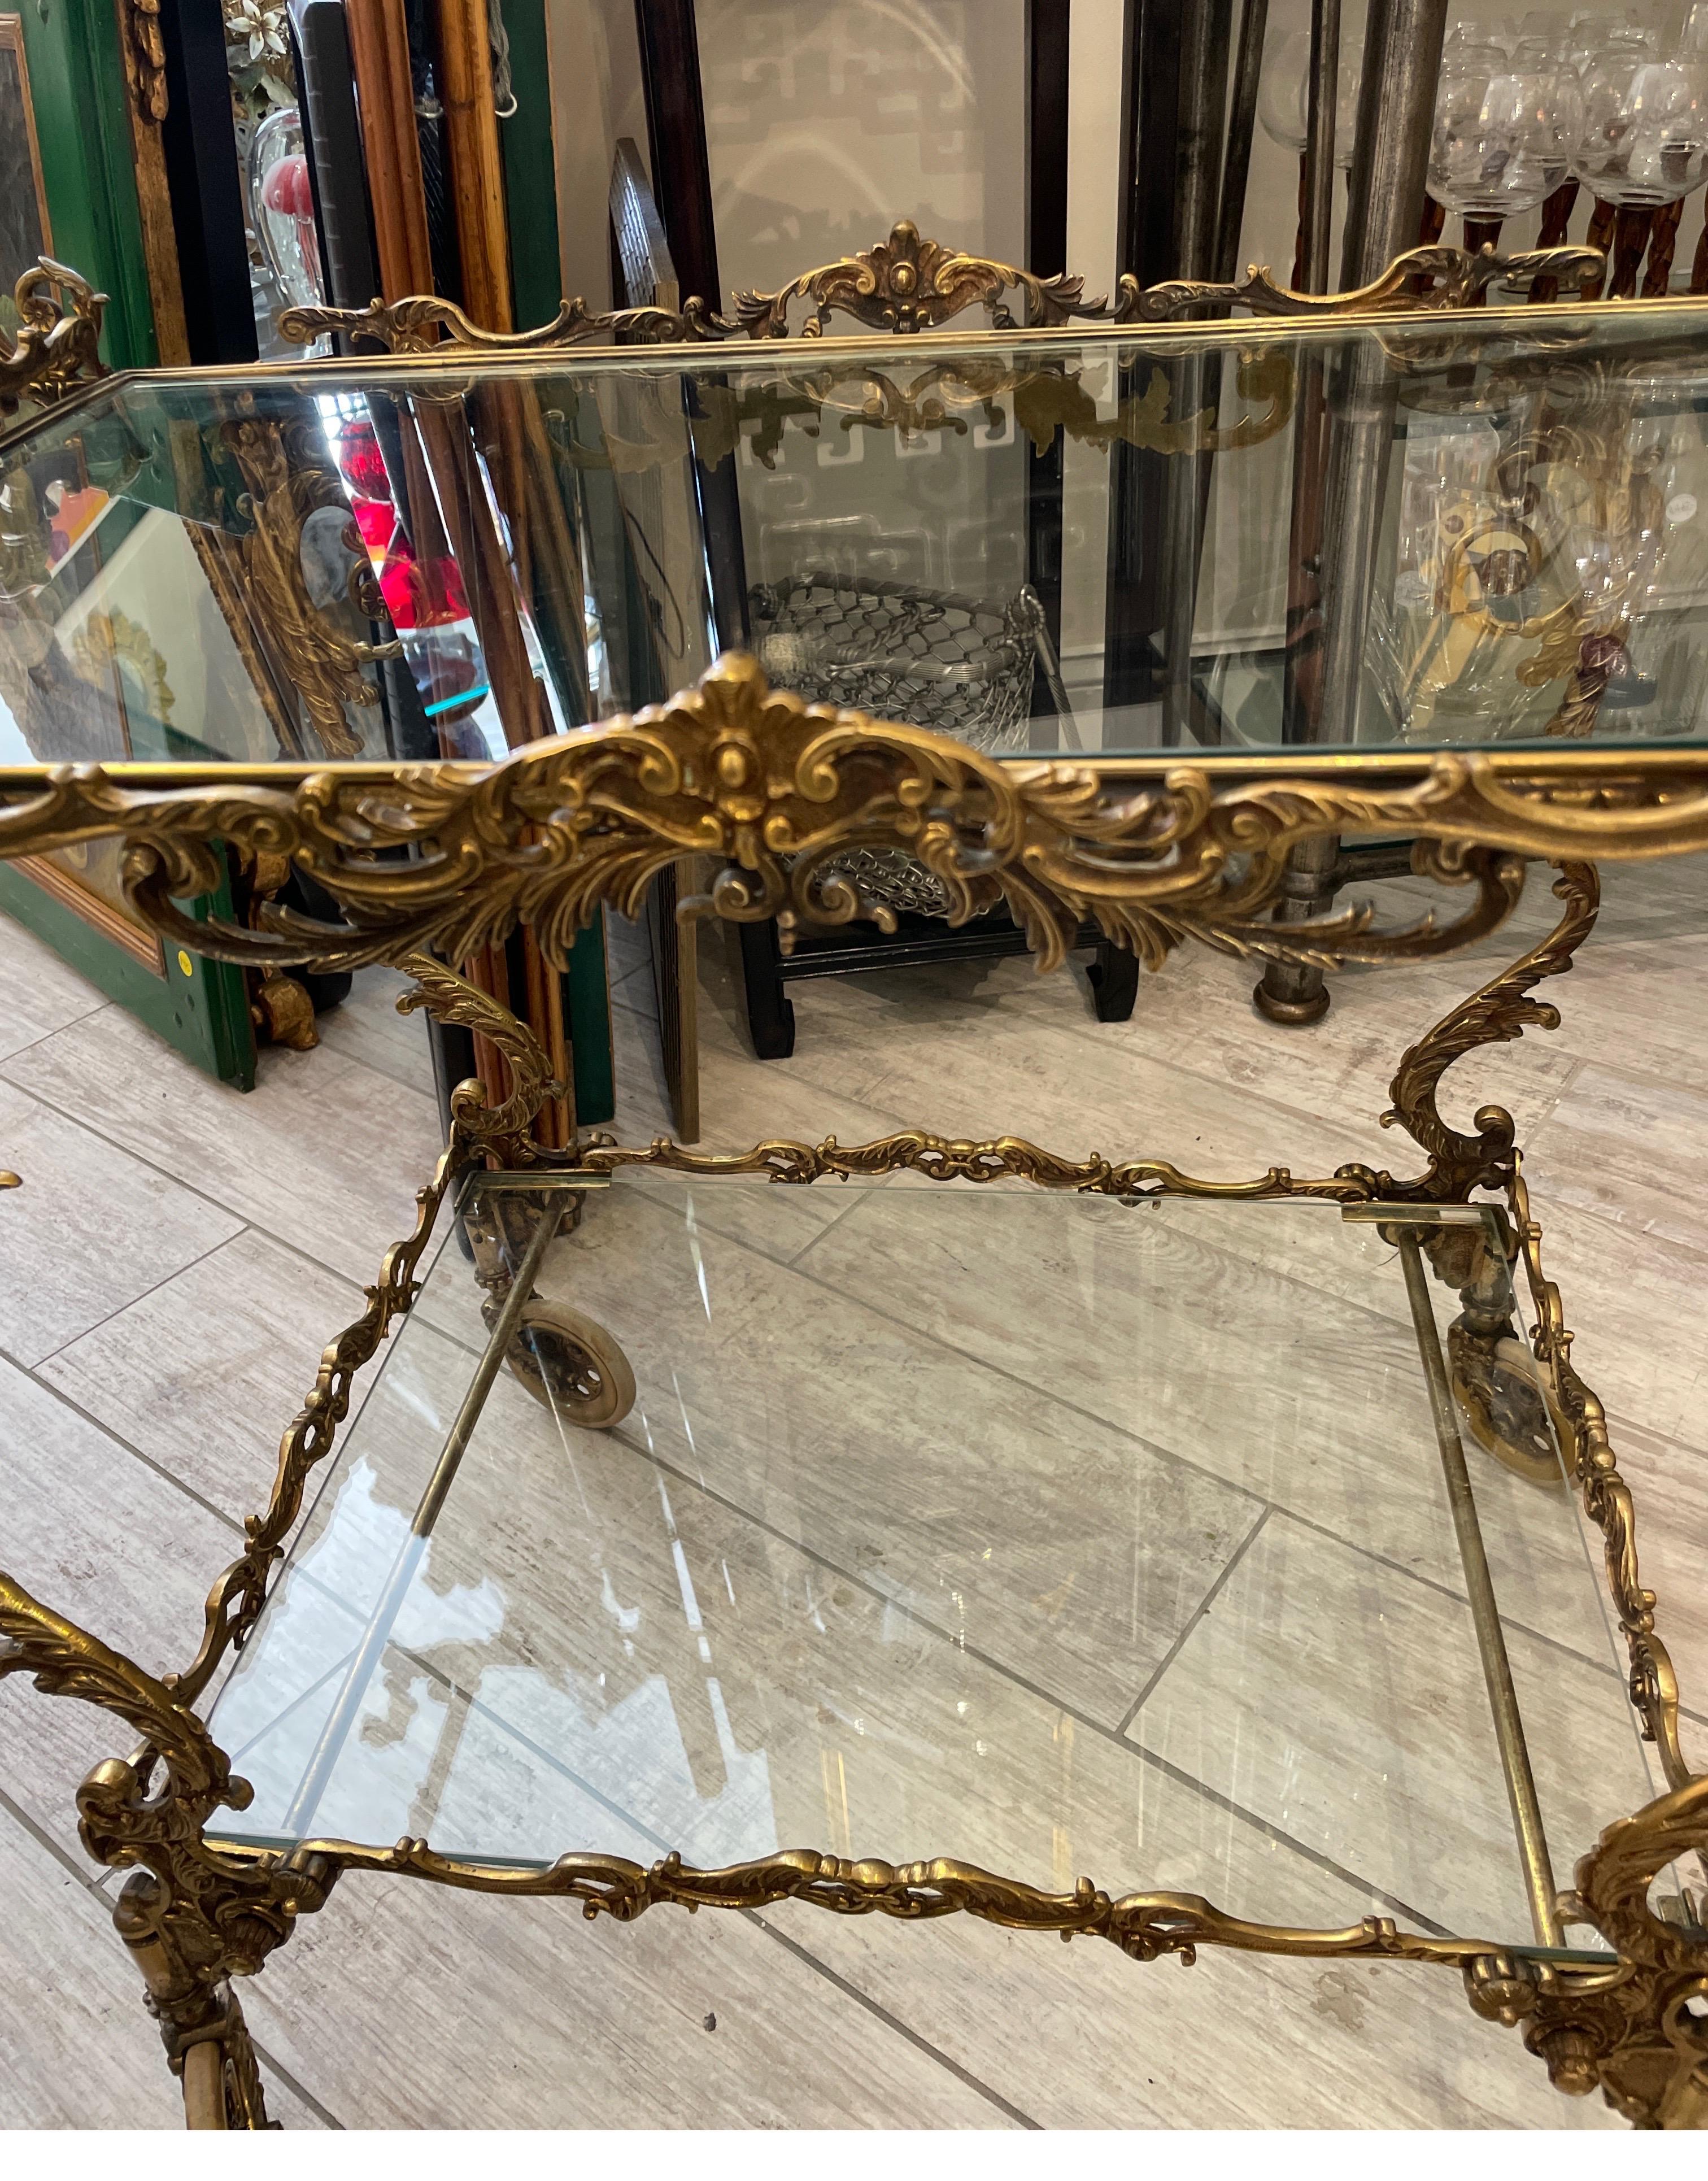 Outstanding example of Italian Rococo two tiered bar cart. This cart is made of solid brass with much attention paid to detail. All sides are beautifully designed with scrolls and sea urchins. This cart is truly a gem.